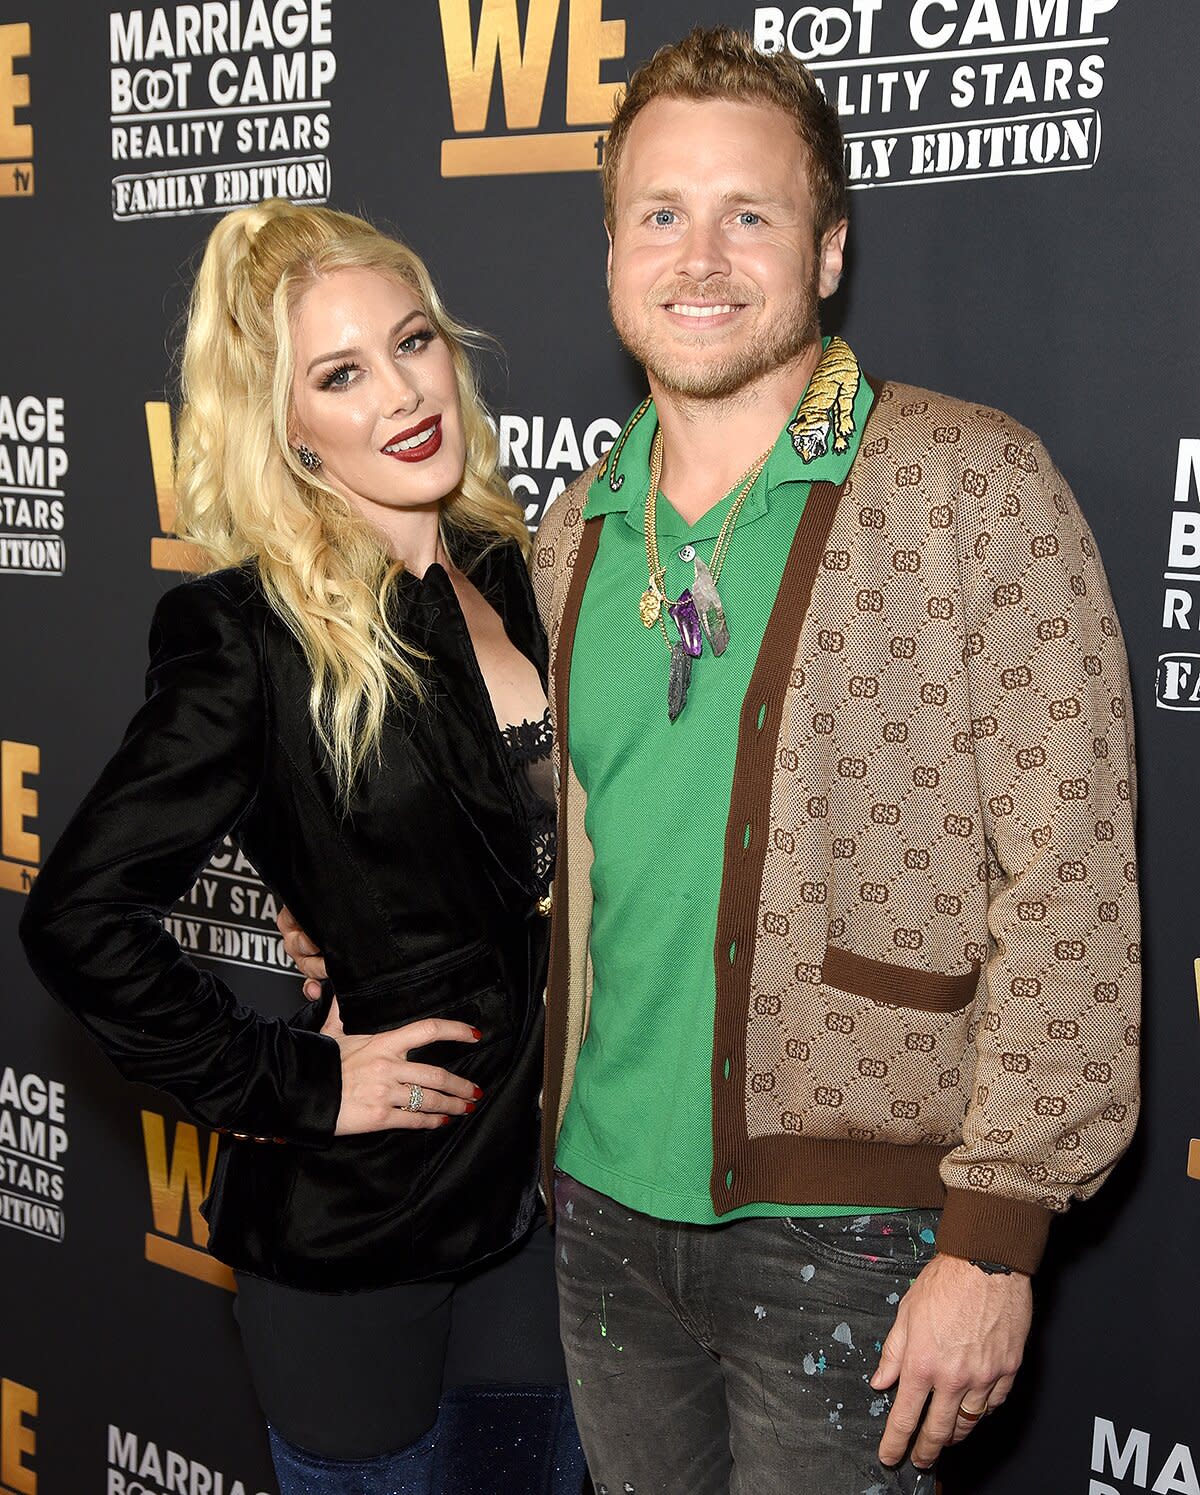 Heidi Montag and Spencer Pratt attend WE tv Celebrates the 100th Episode of the "Marriage Boot Camp"